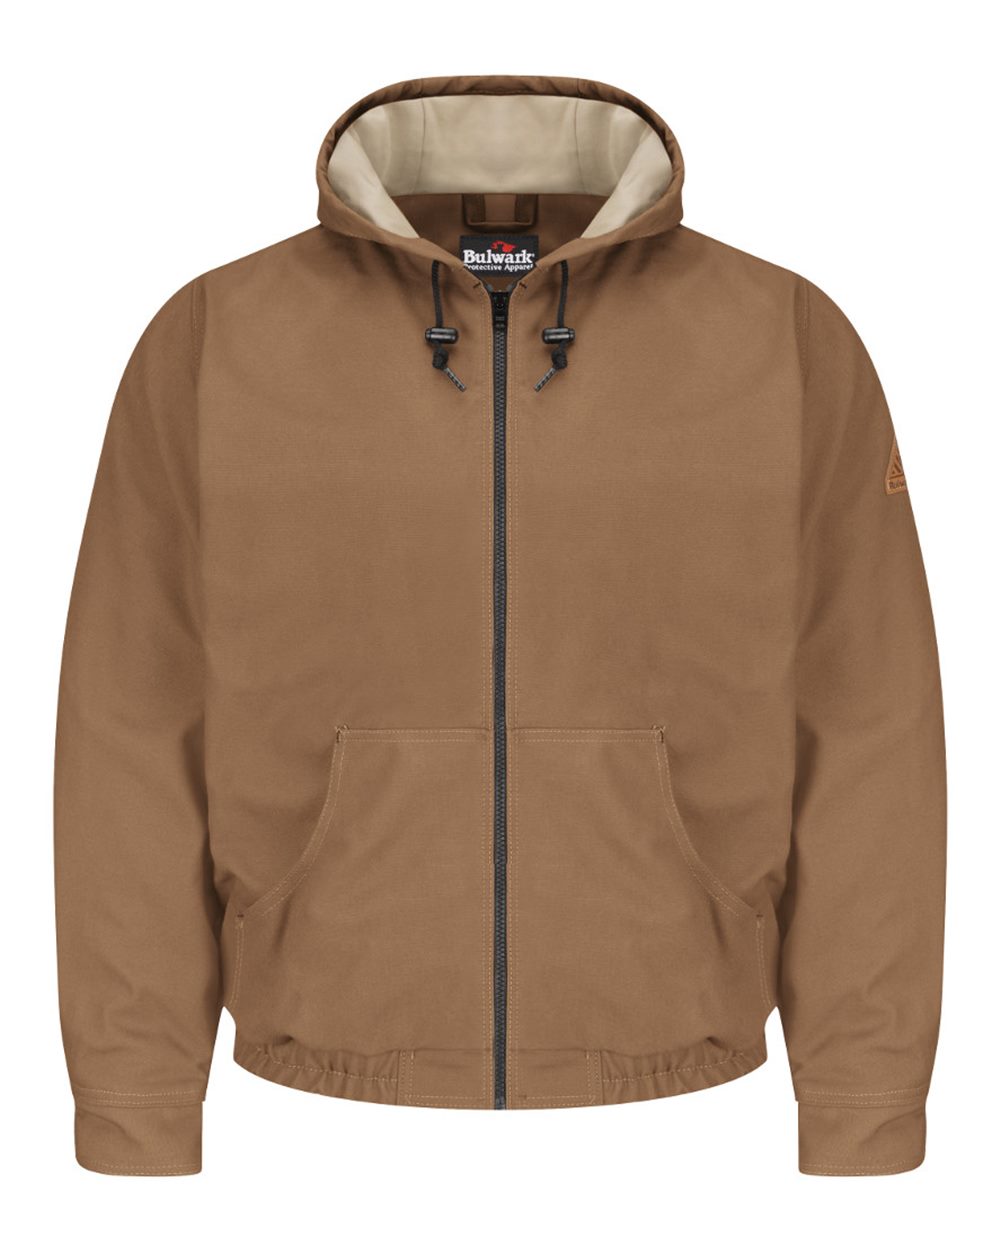 Brown Duck Hooded Jacket - EXCEL FR® ComforTouch® - Long Sizes - JLH4L-Bulwark